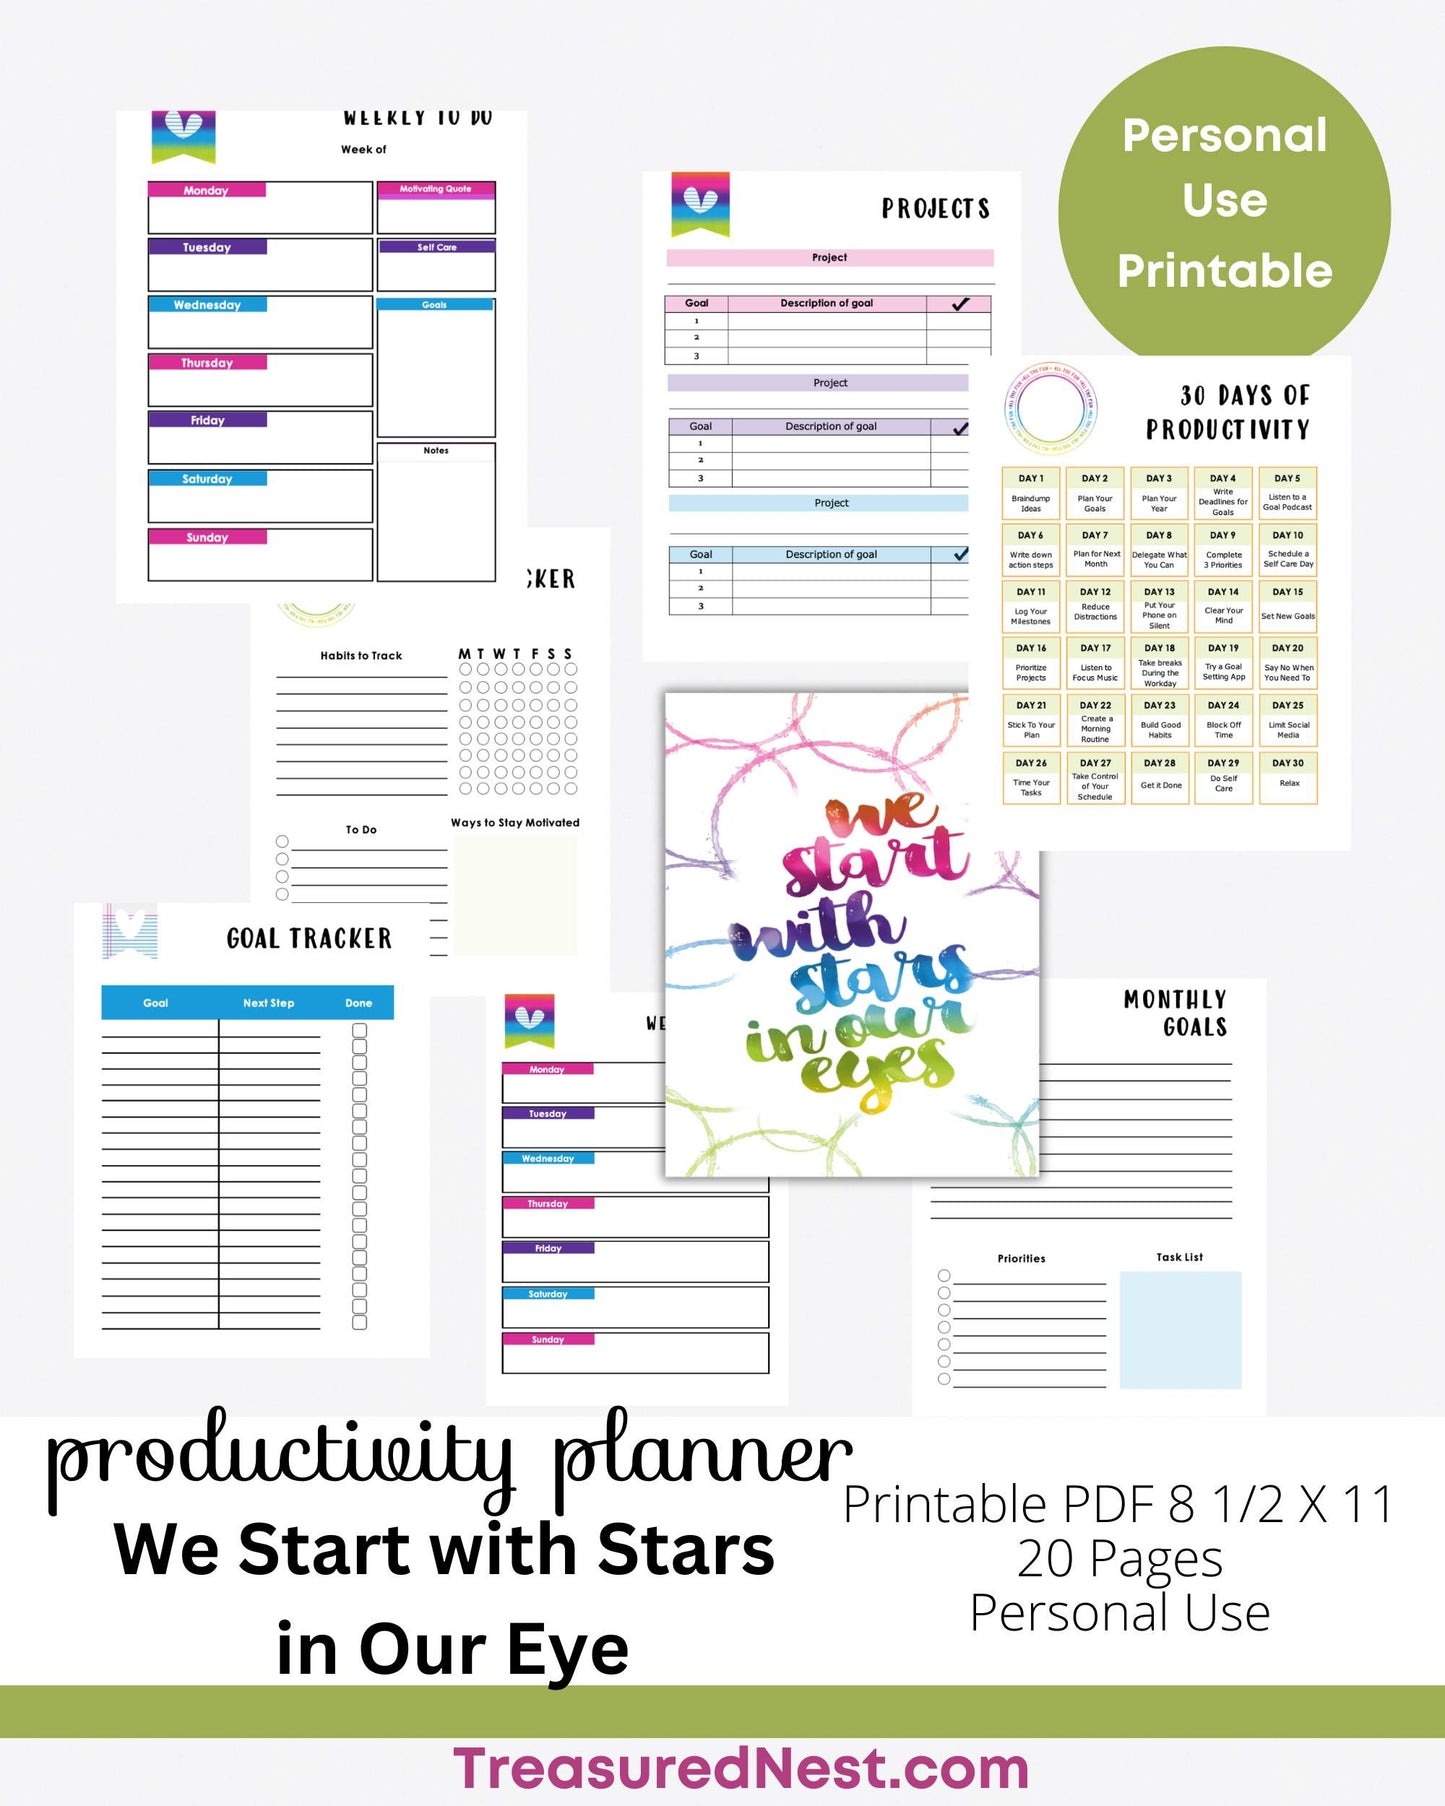 We Start with Stars in Our Eye Planner